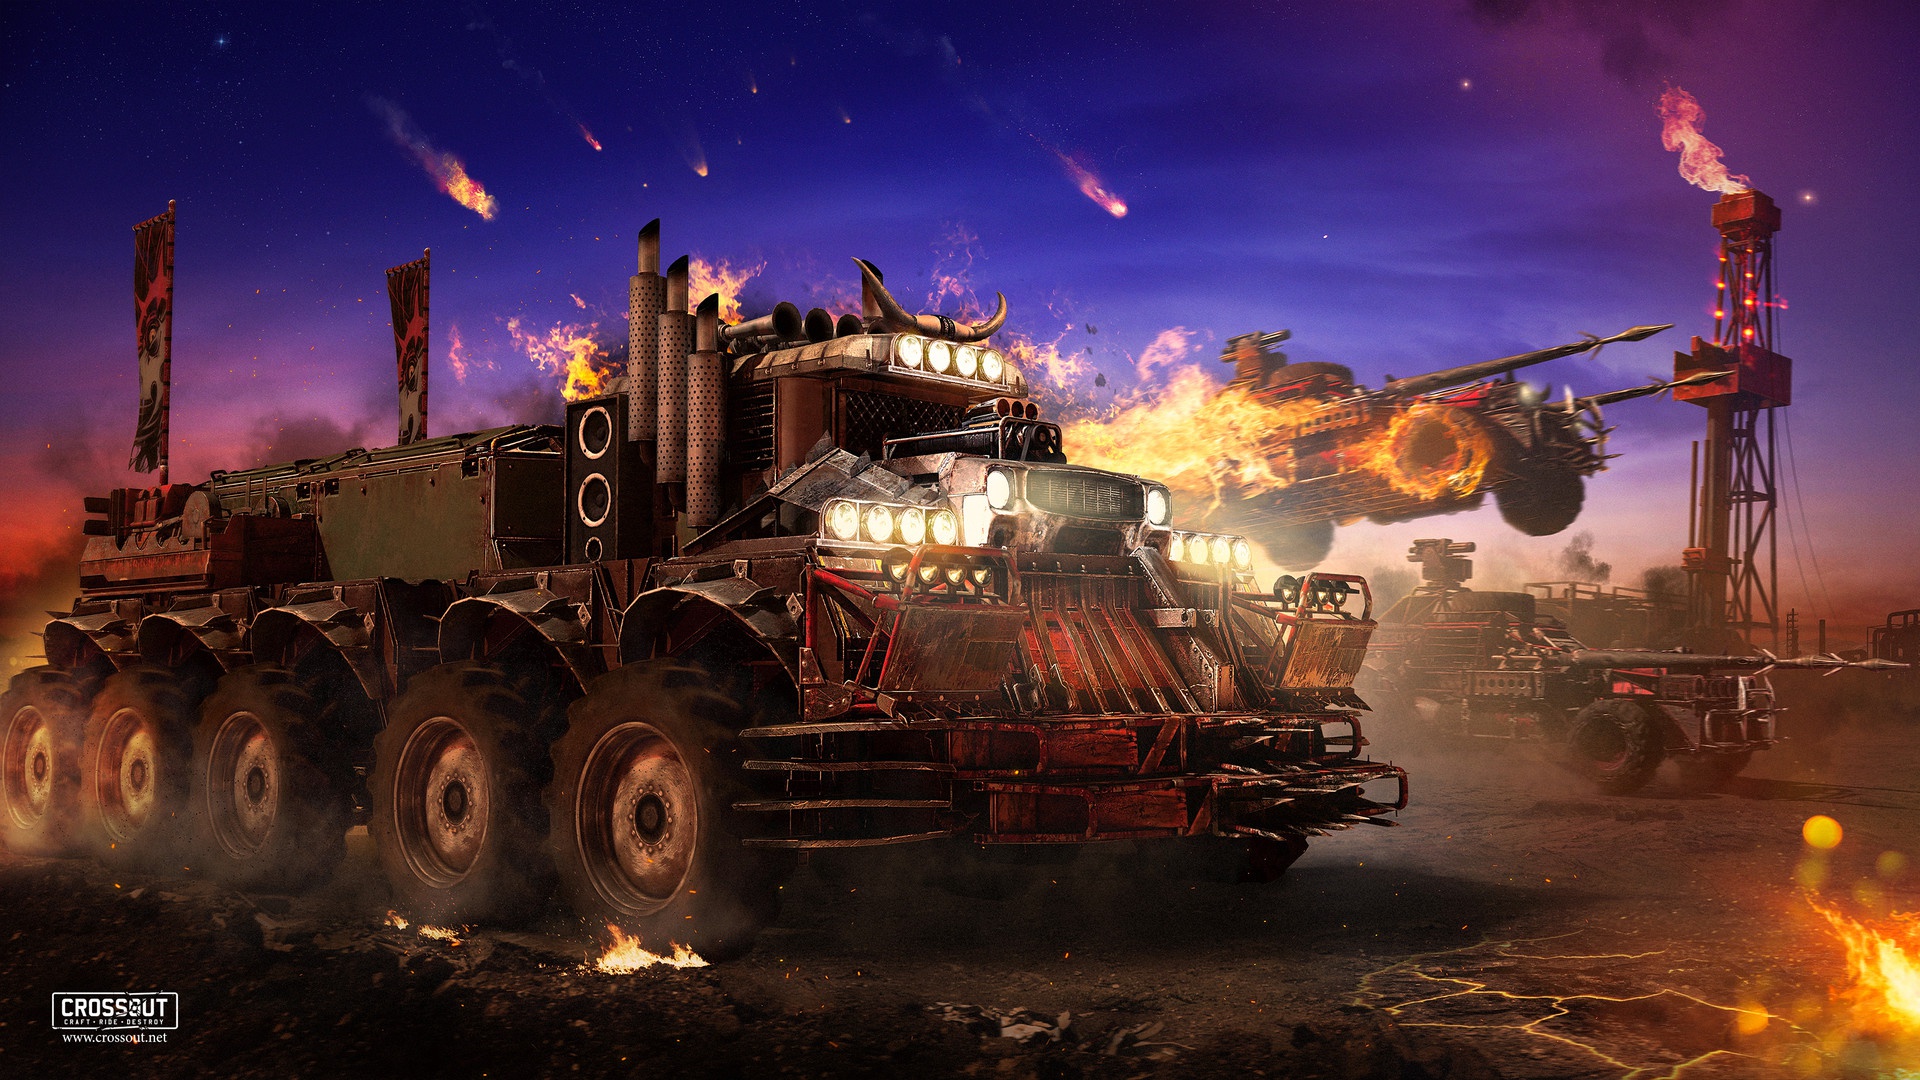 Crossout Video Game Post Apocalyptic Truck Vehicle 1920x1080